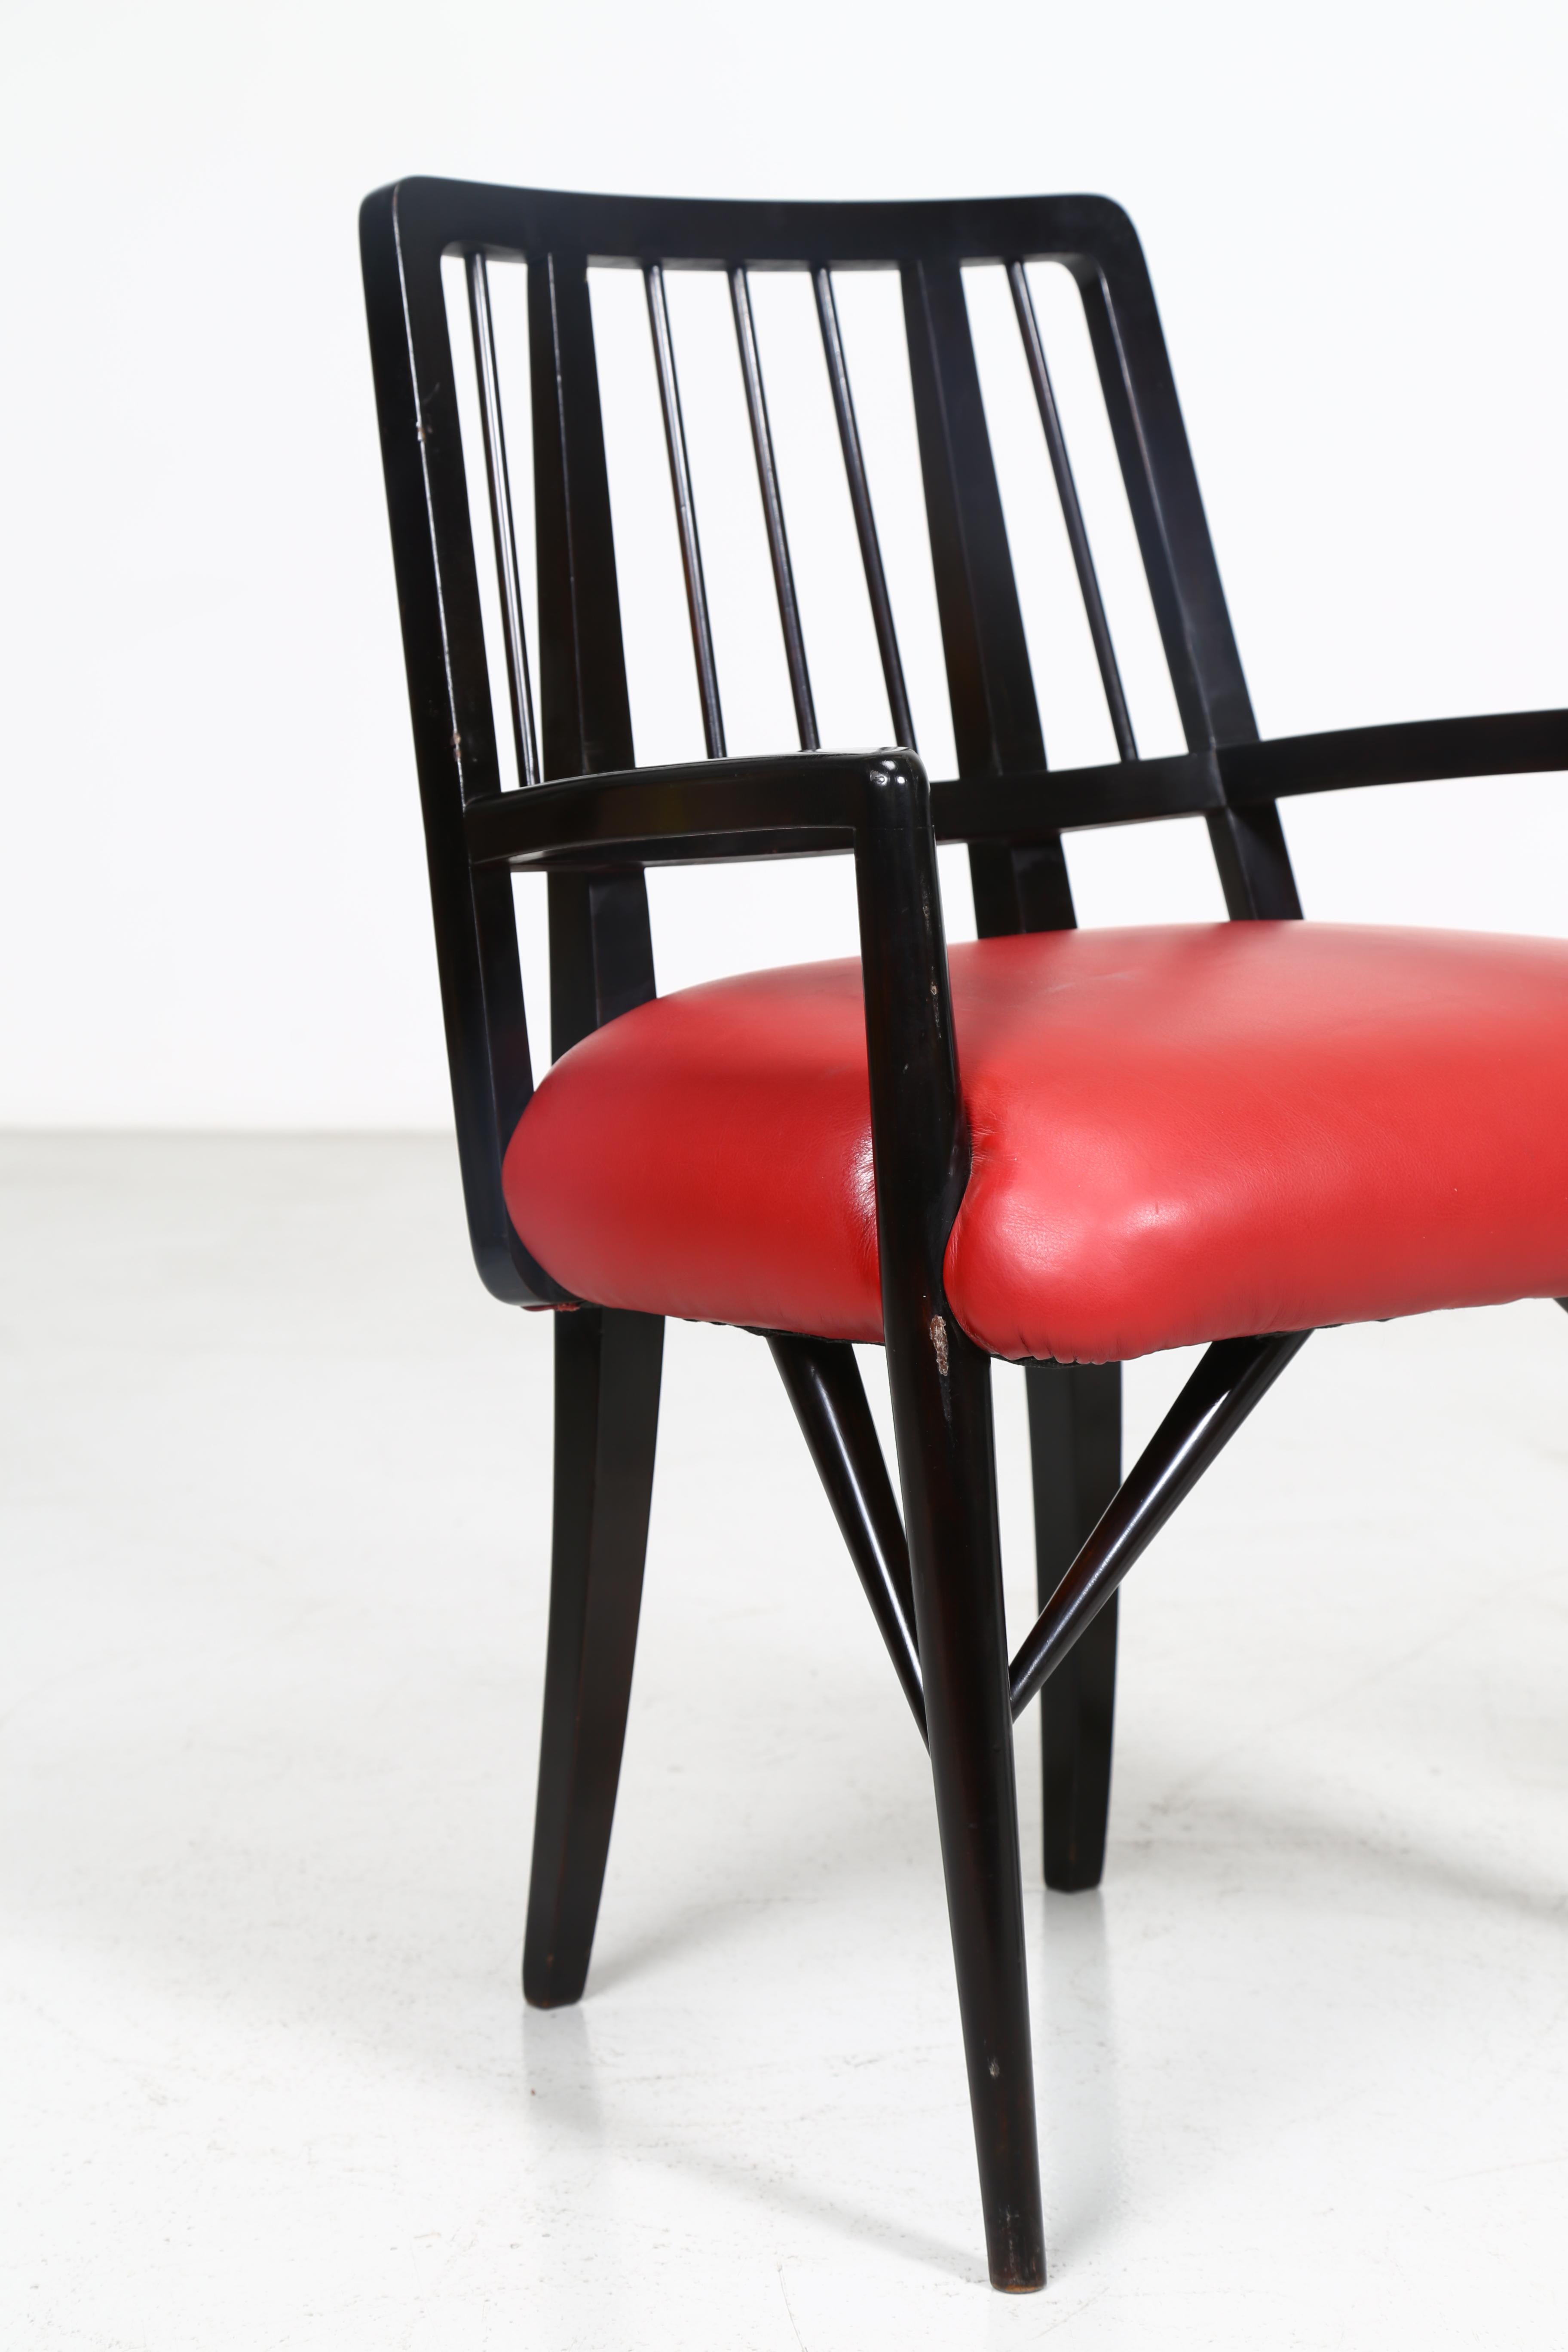 Paul Laszlo Set of Four Chairs in Black Lacquered Wood, 1950s For Sale 4